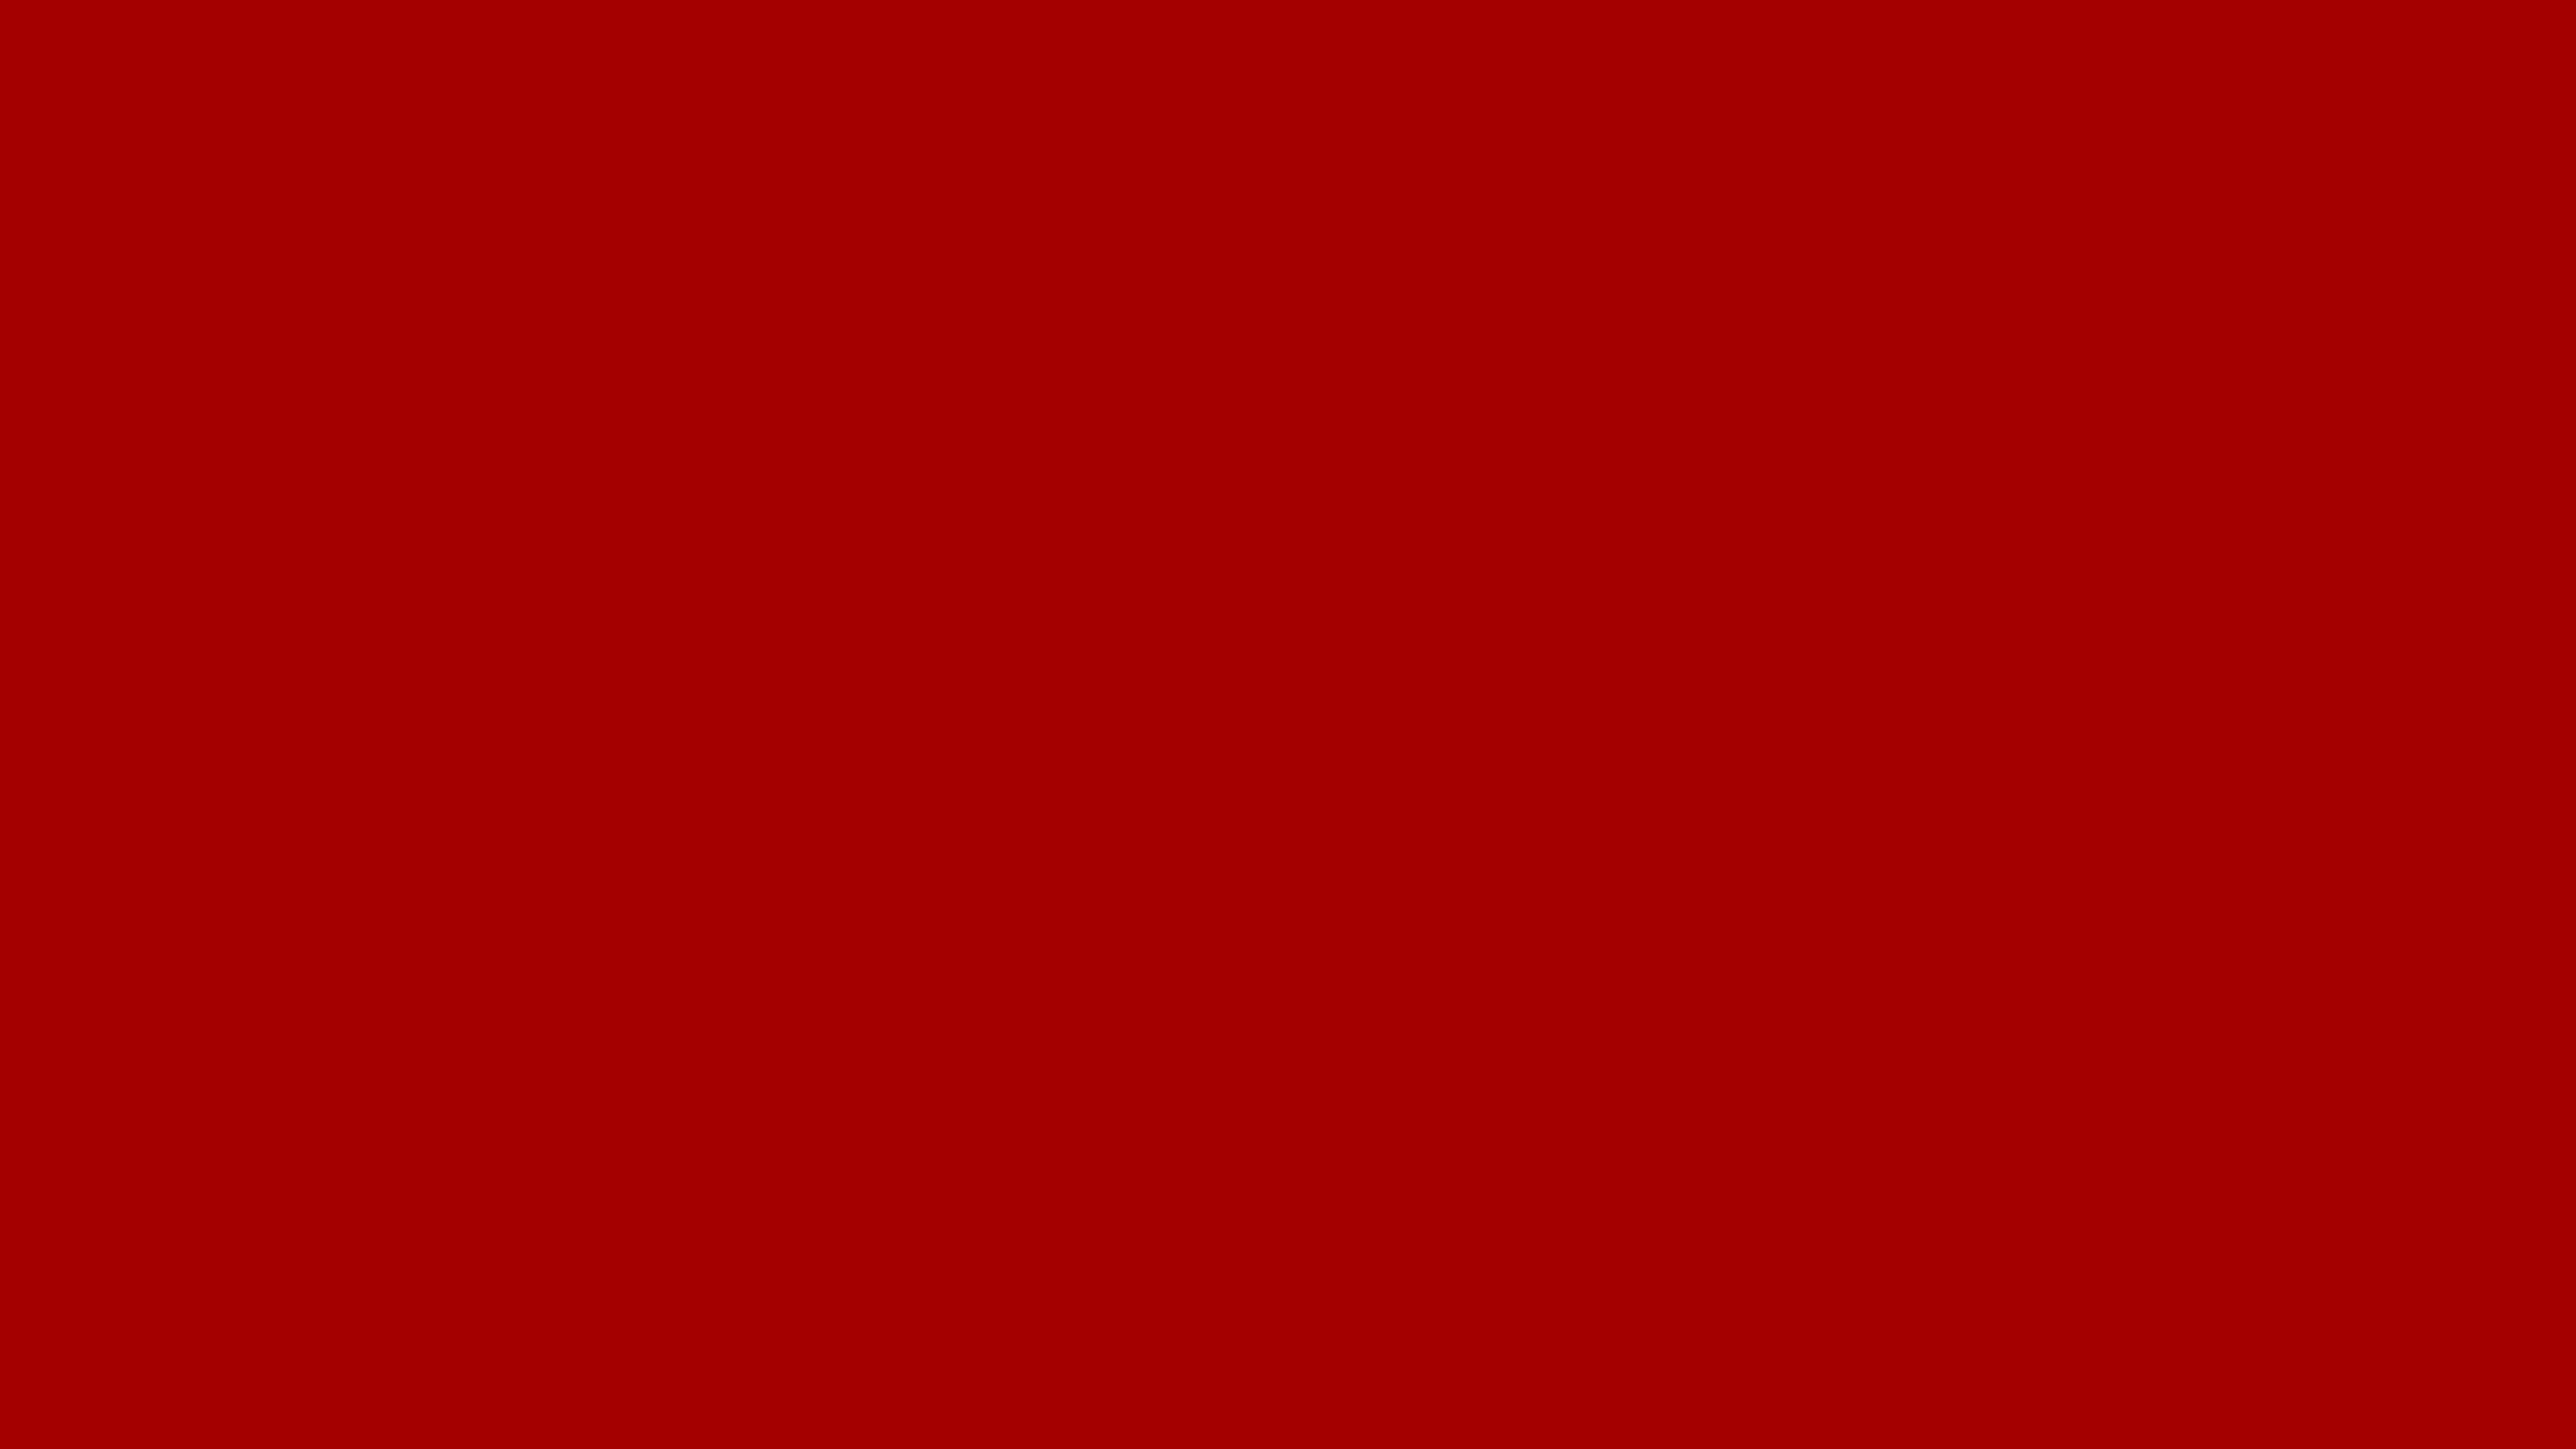 5120x2880 Dark Candy Apple Red Solid Color Background